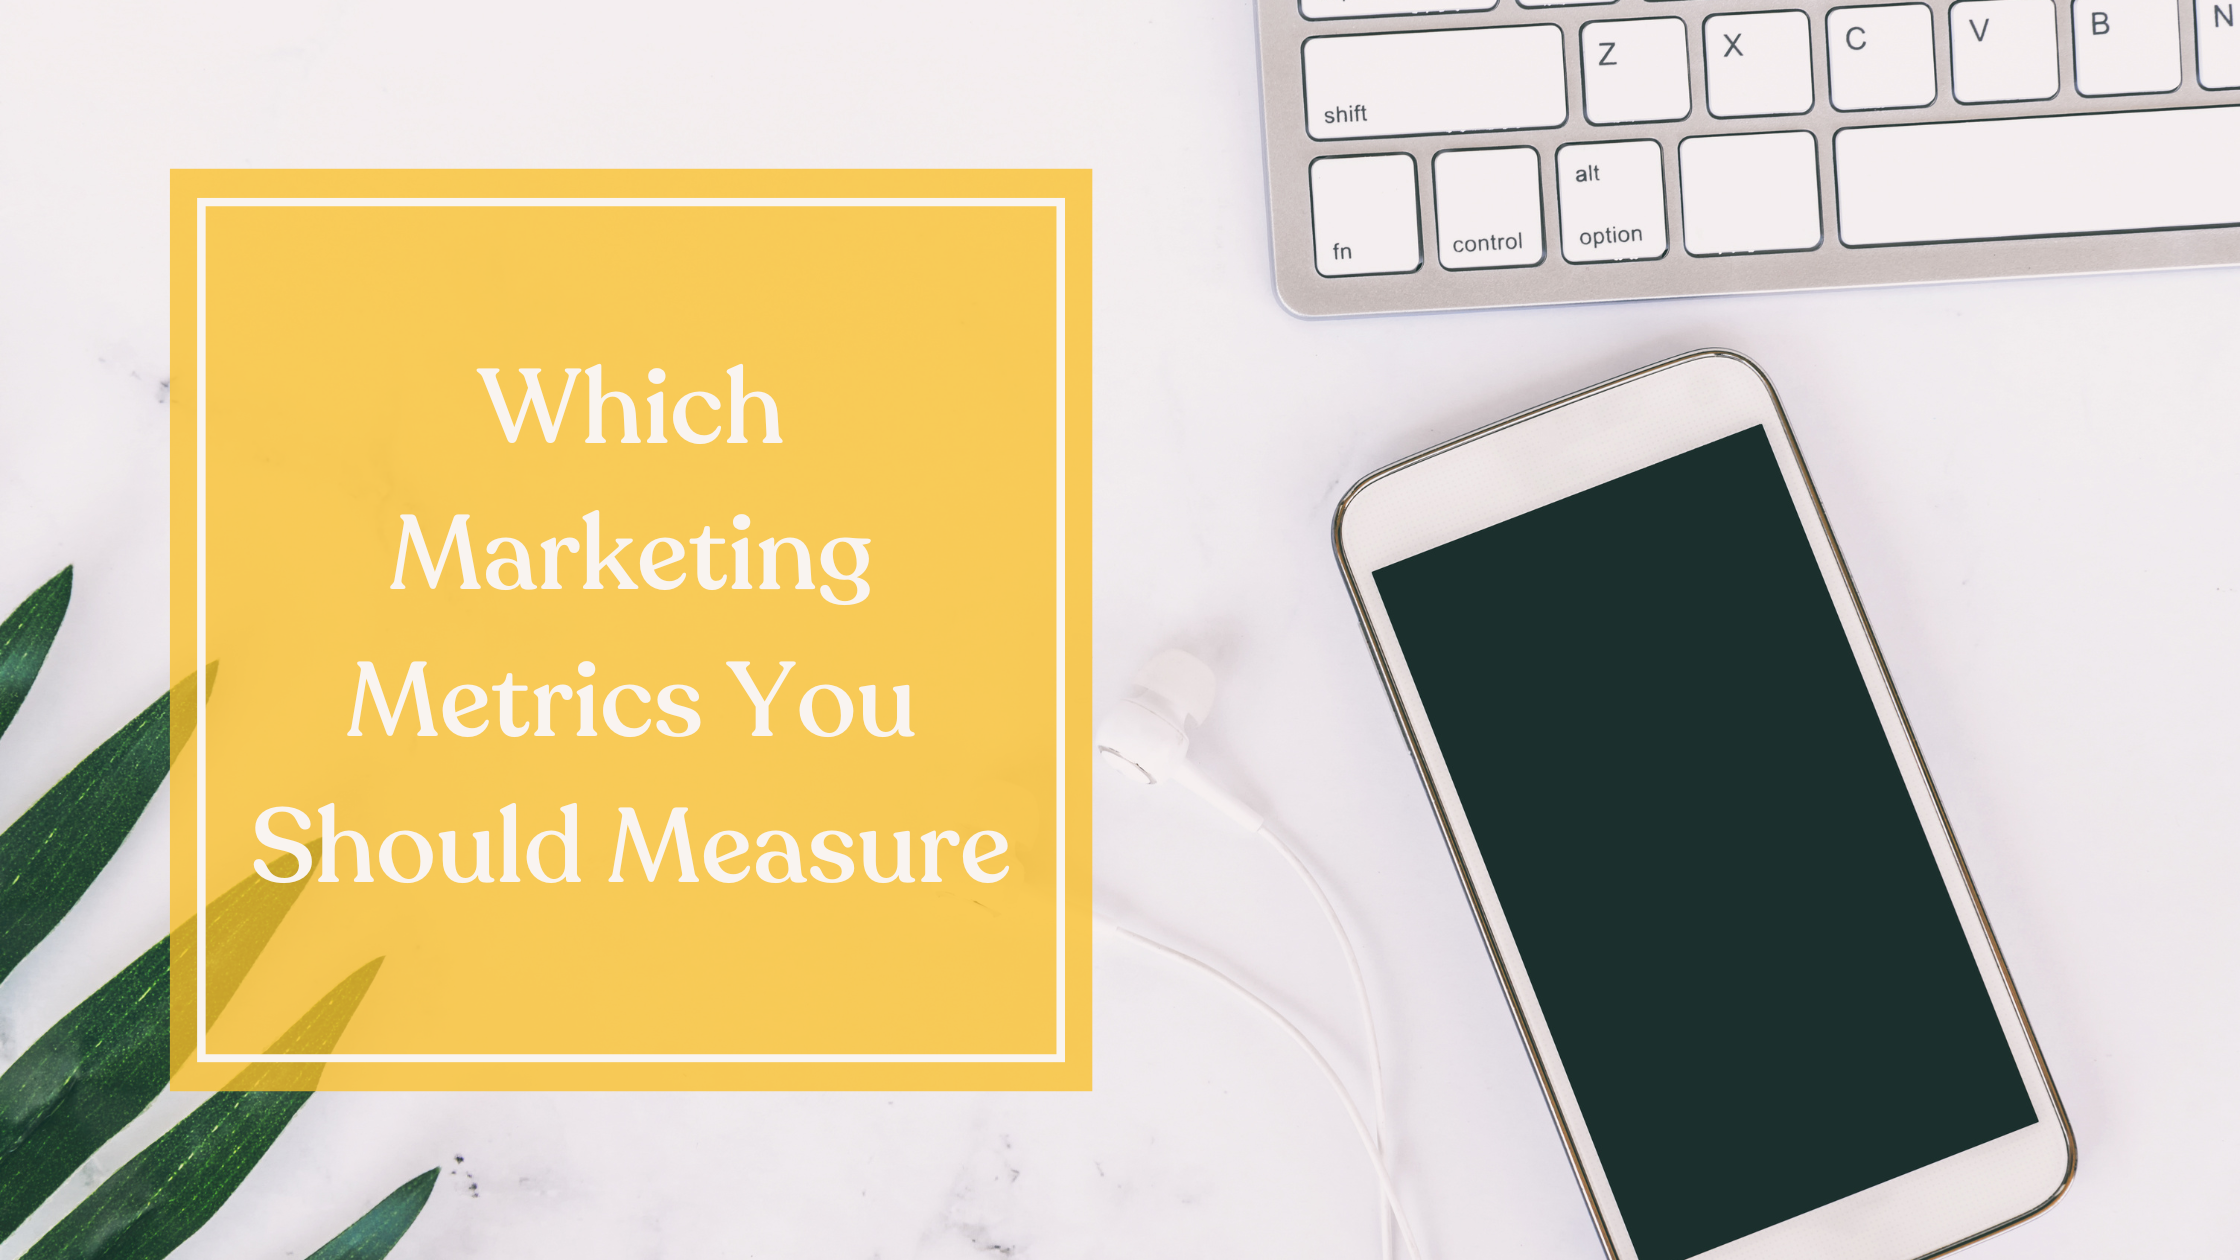 Which Marketing Metrics You Should Measure